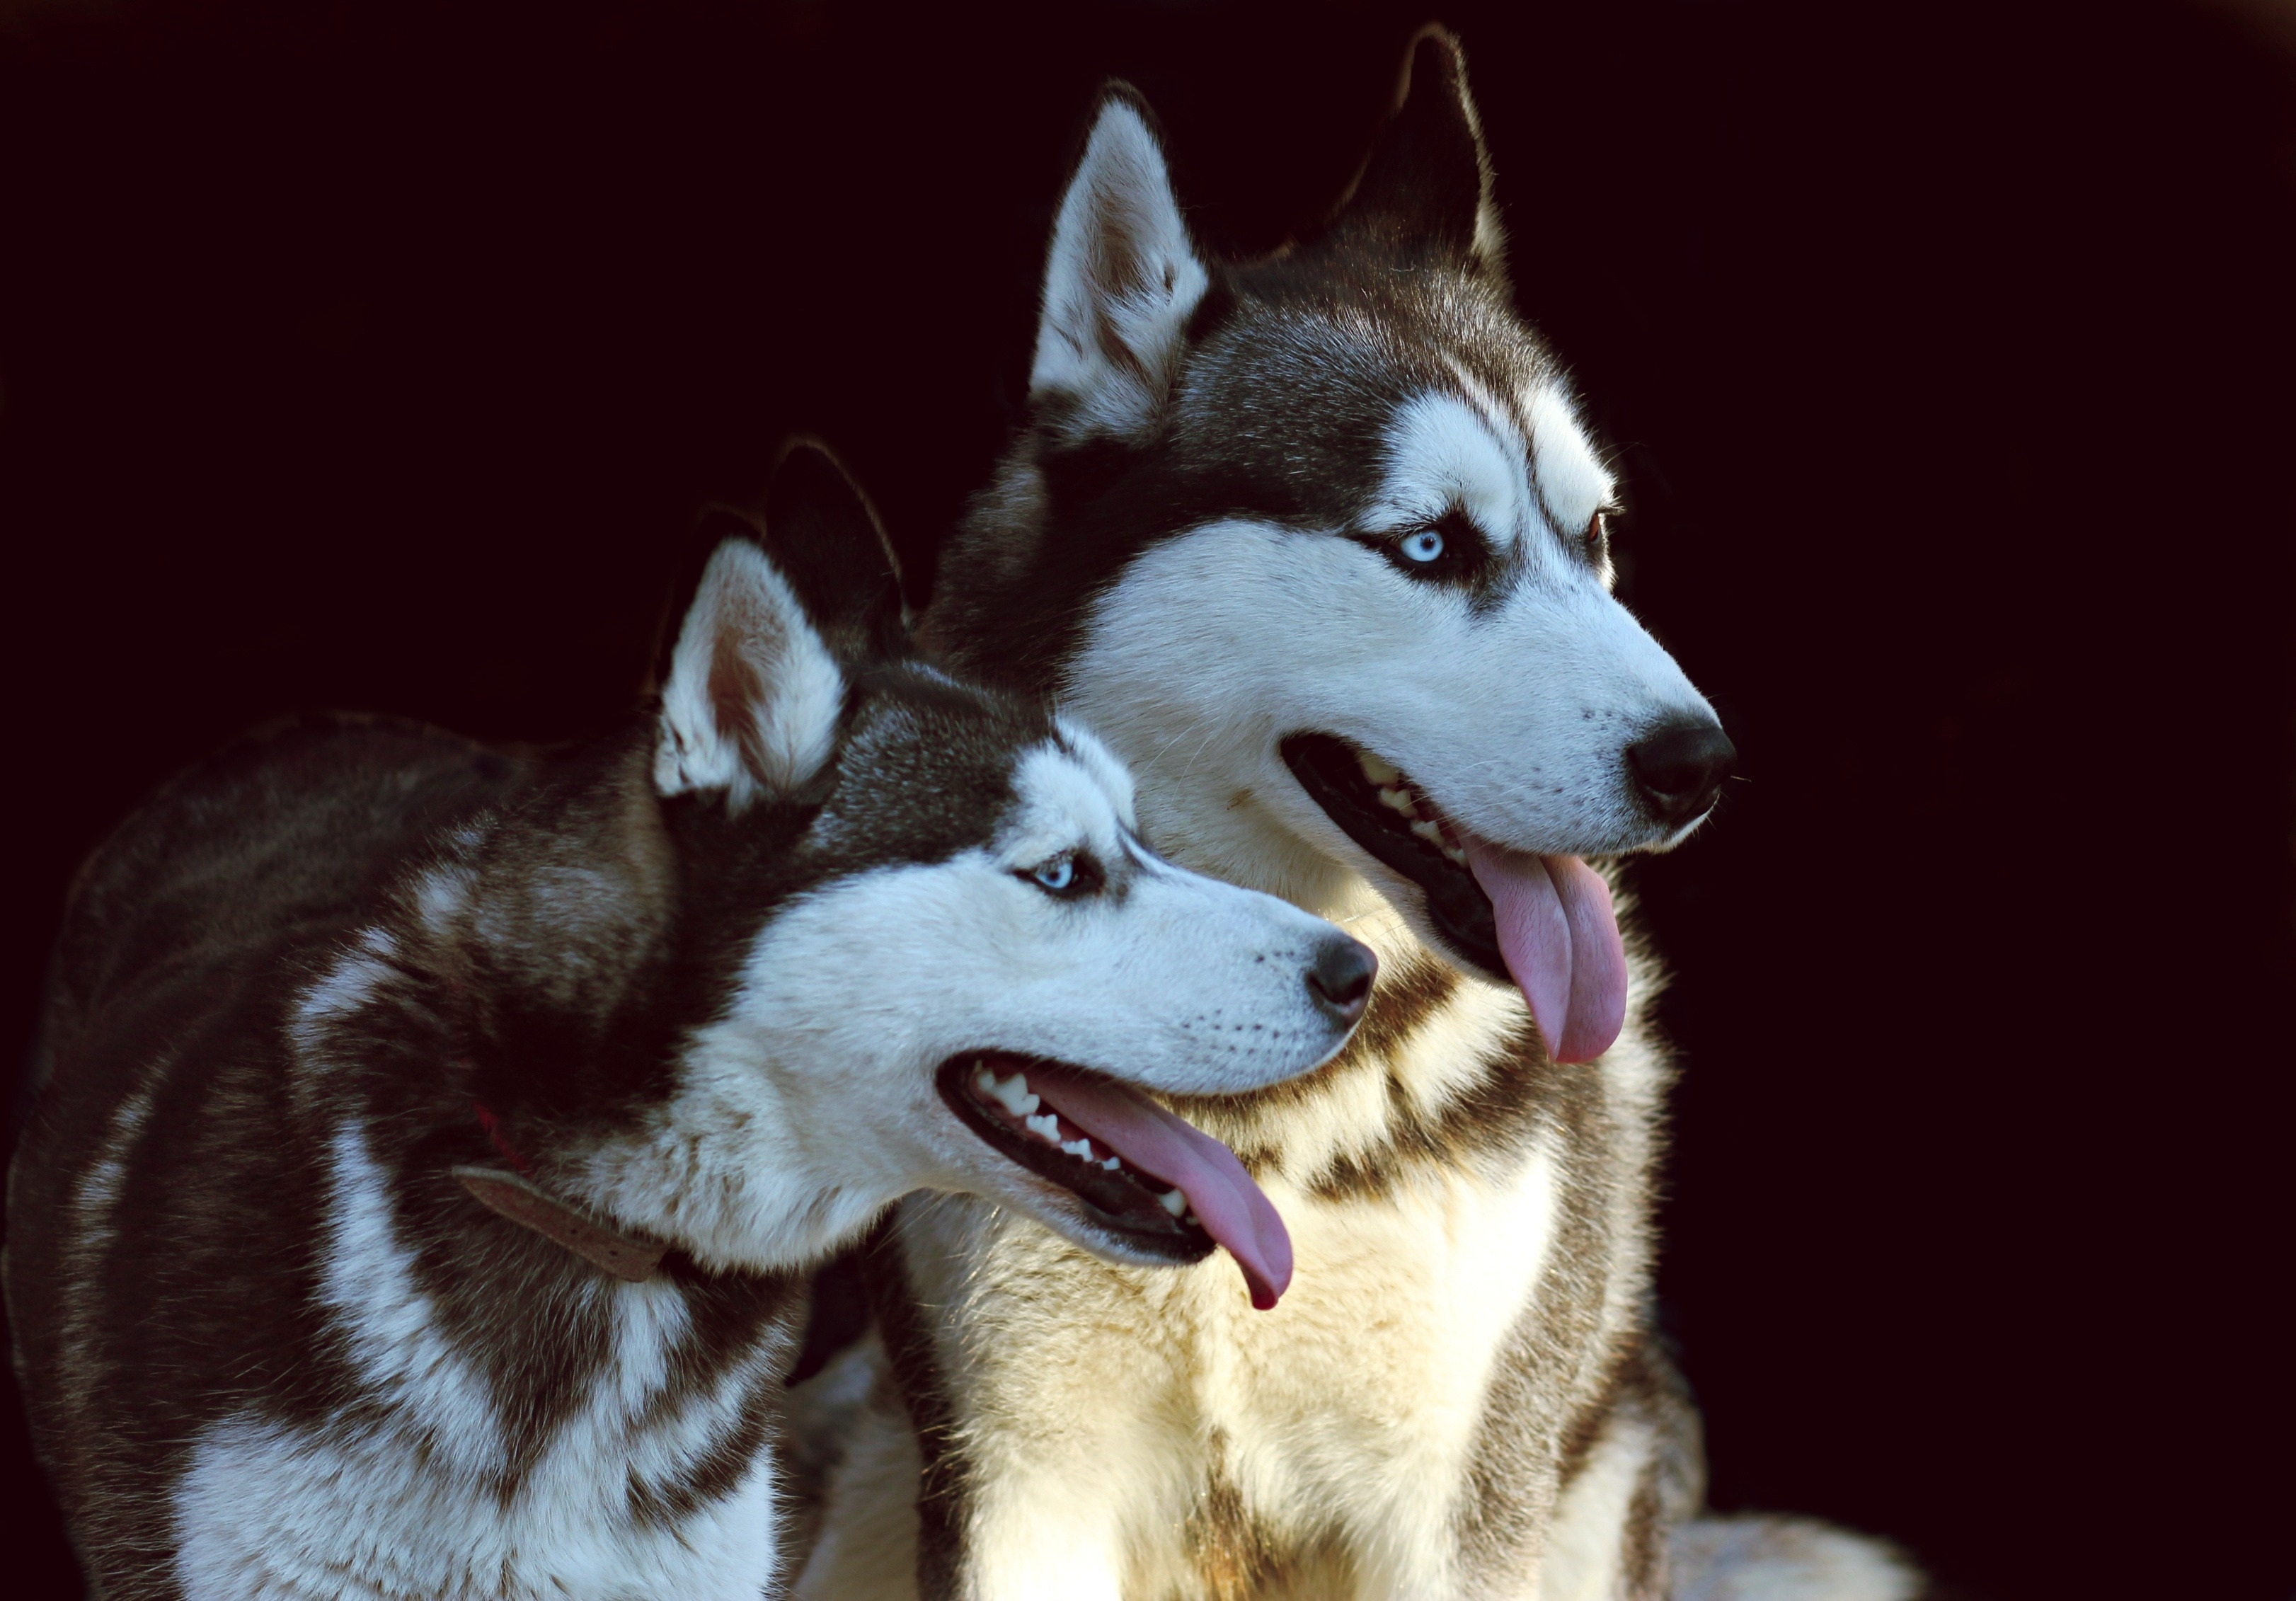 Wallpapers husky dog looking cute dogs photo shoot on the desktop